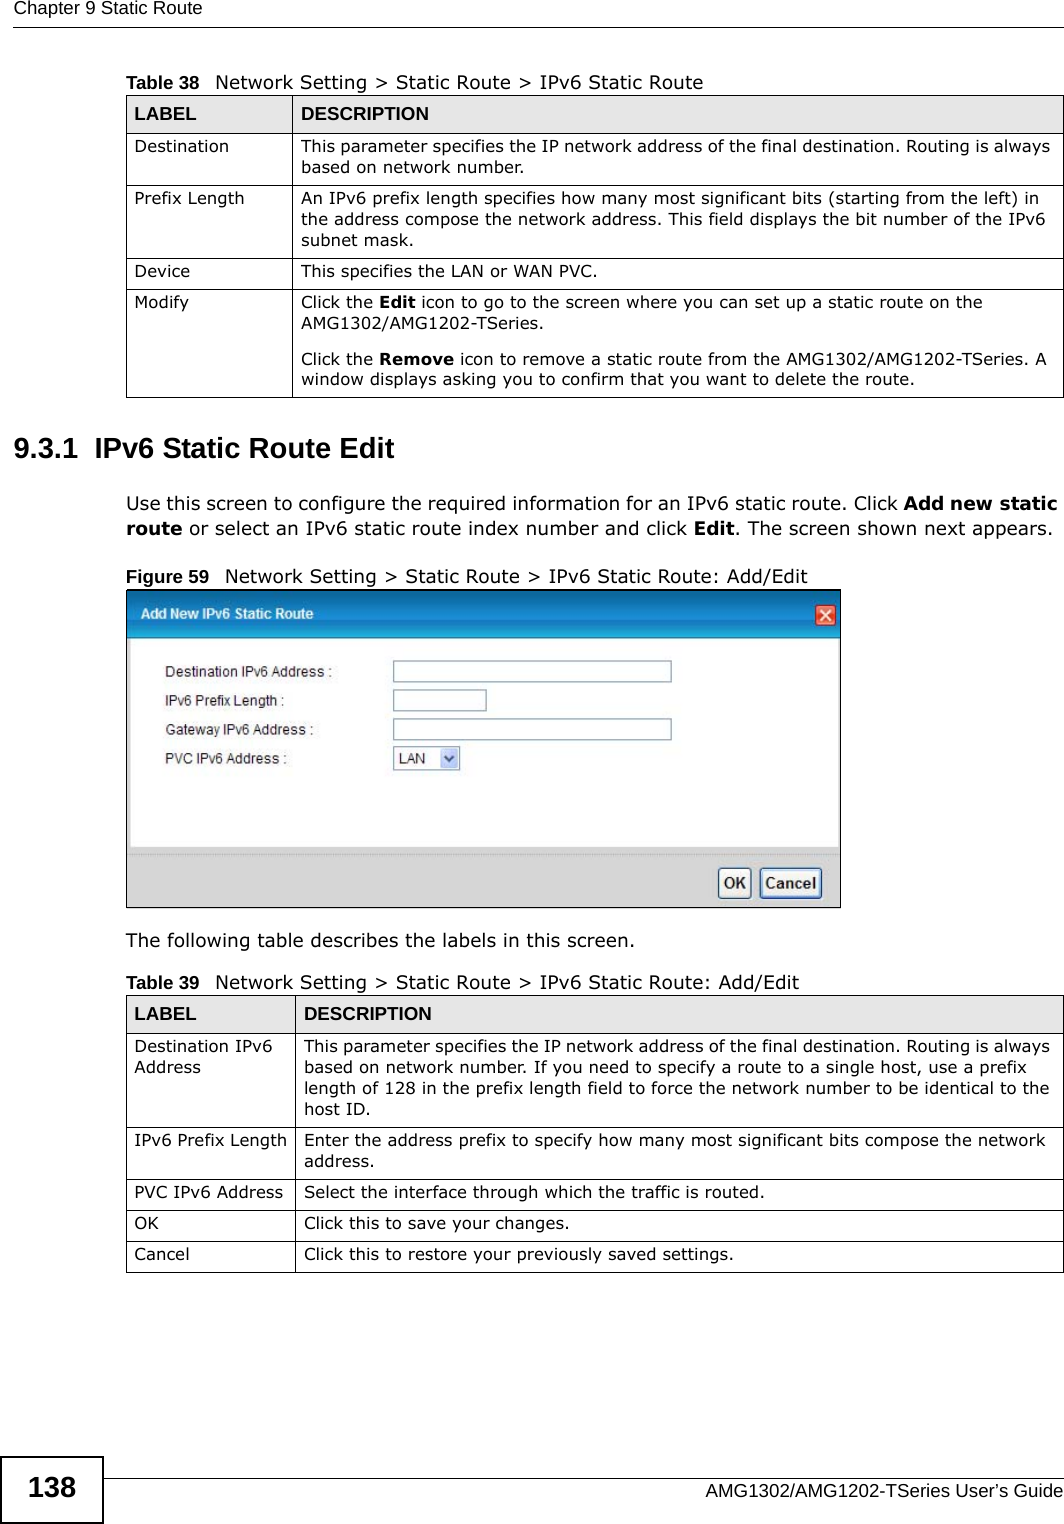 Chapter 9 Static RouteAMG1302/AMG1202-TSeries User’s Guide1389.3.1  IPv6 Static Route Edit   Use this screen to configure the required information for an IPv6 static route. Click Add new static route or select an IPv6 static route index number and click Edit. The screen shown next appears.Figure 59   Network Setting &gt; Static Route &gt; IPv6 Static Route: Add/EditThe following table describes the labels in this screen. Destination This parameter specifies the IP network address of the final destination. Routing is always based on network number. Prefix Length An IPv6 prefix length specifies how many most significant bits (starting from the left) in the address compose the network address. This field displays the bit number of the IPv6 subnet mask.Device This specifies the LAN or WAN PVC.Modify Click the Edit icon to go to the screen where you can set up a static route on the AMG1302/AMG1202-TSeries.Click the Remove icon to remove a static route from the AMG1302/AMG1202-TSeries. A window displays asking you to confirm that you want to delete the route. Table 38   Network Setting &gt; Static Route &gt; IPv6 Static RouteLABEL DESCRIPTIONTable 39   Network Setting &gt; Static Route &gt; IPv6 Static Route: Add/EditLABEL DESCRIPTIONDestination IPv6 AddressThis parameter specifies the IP network address of the final destination. Routing is always based on network number. If you need to specify a route to a single host, use a prefix length of 128 in the prefix length field to force the network number to be identical to the host ID.IPv6 Prefix Length Enter the address prefix to specify how many most significant bits compose the network address.PVC IPv6 Address Select the interface through which the traffic is routed.OK Click this to save your changes.Cancel Click this to restore your previously saved settings.